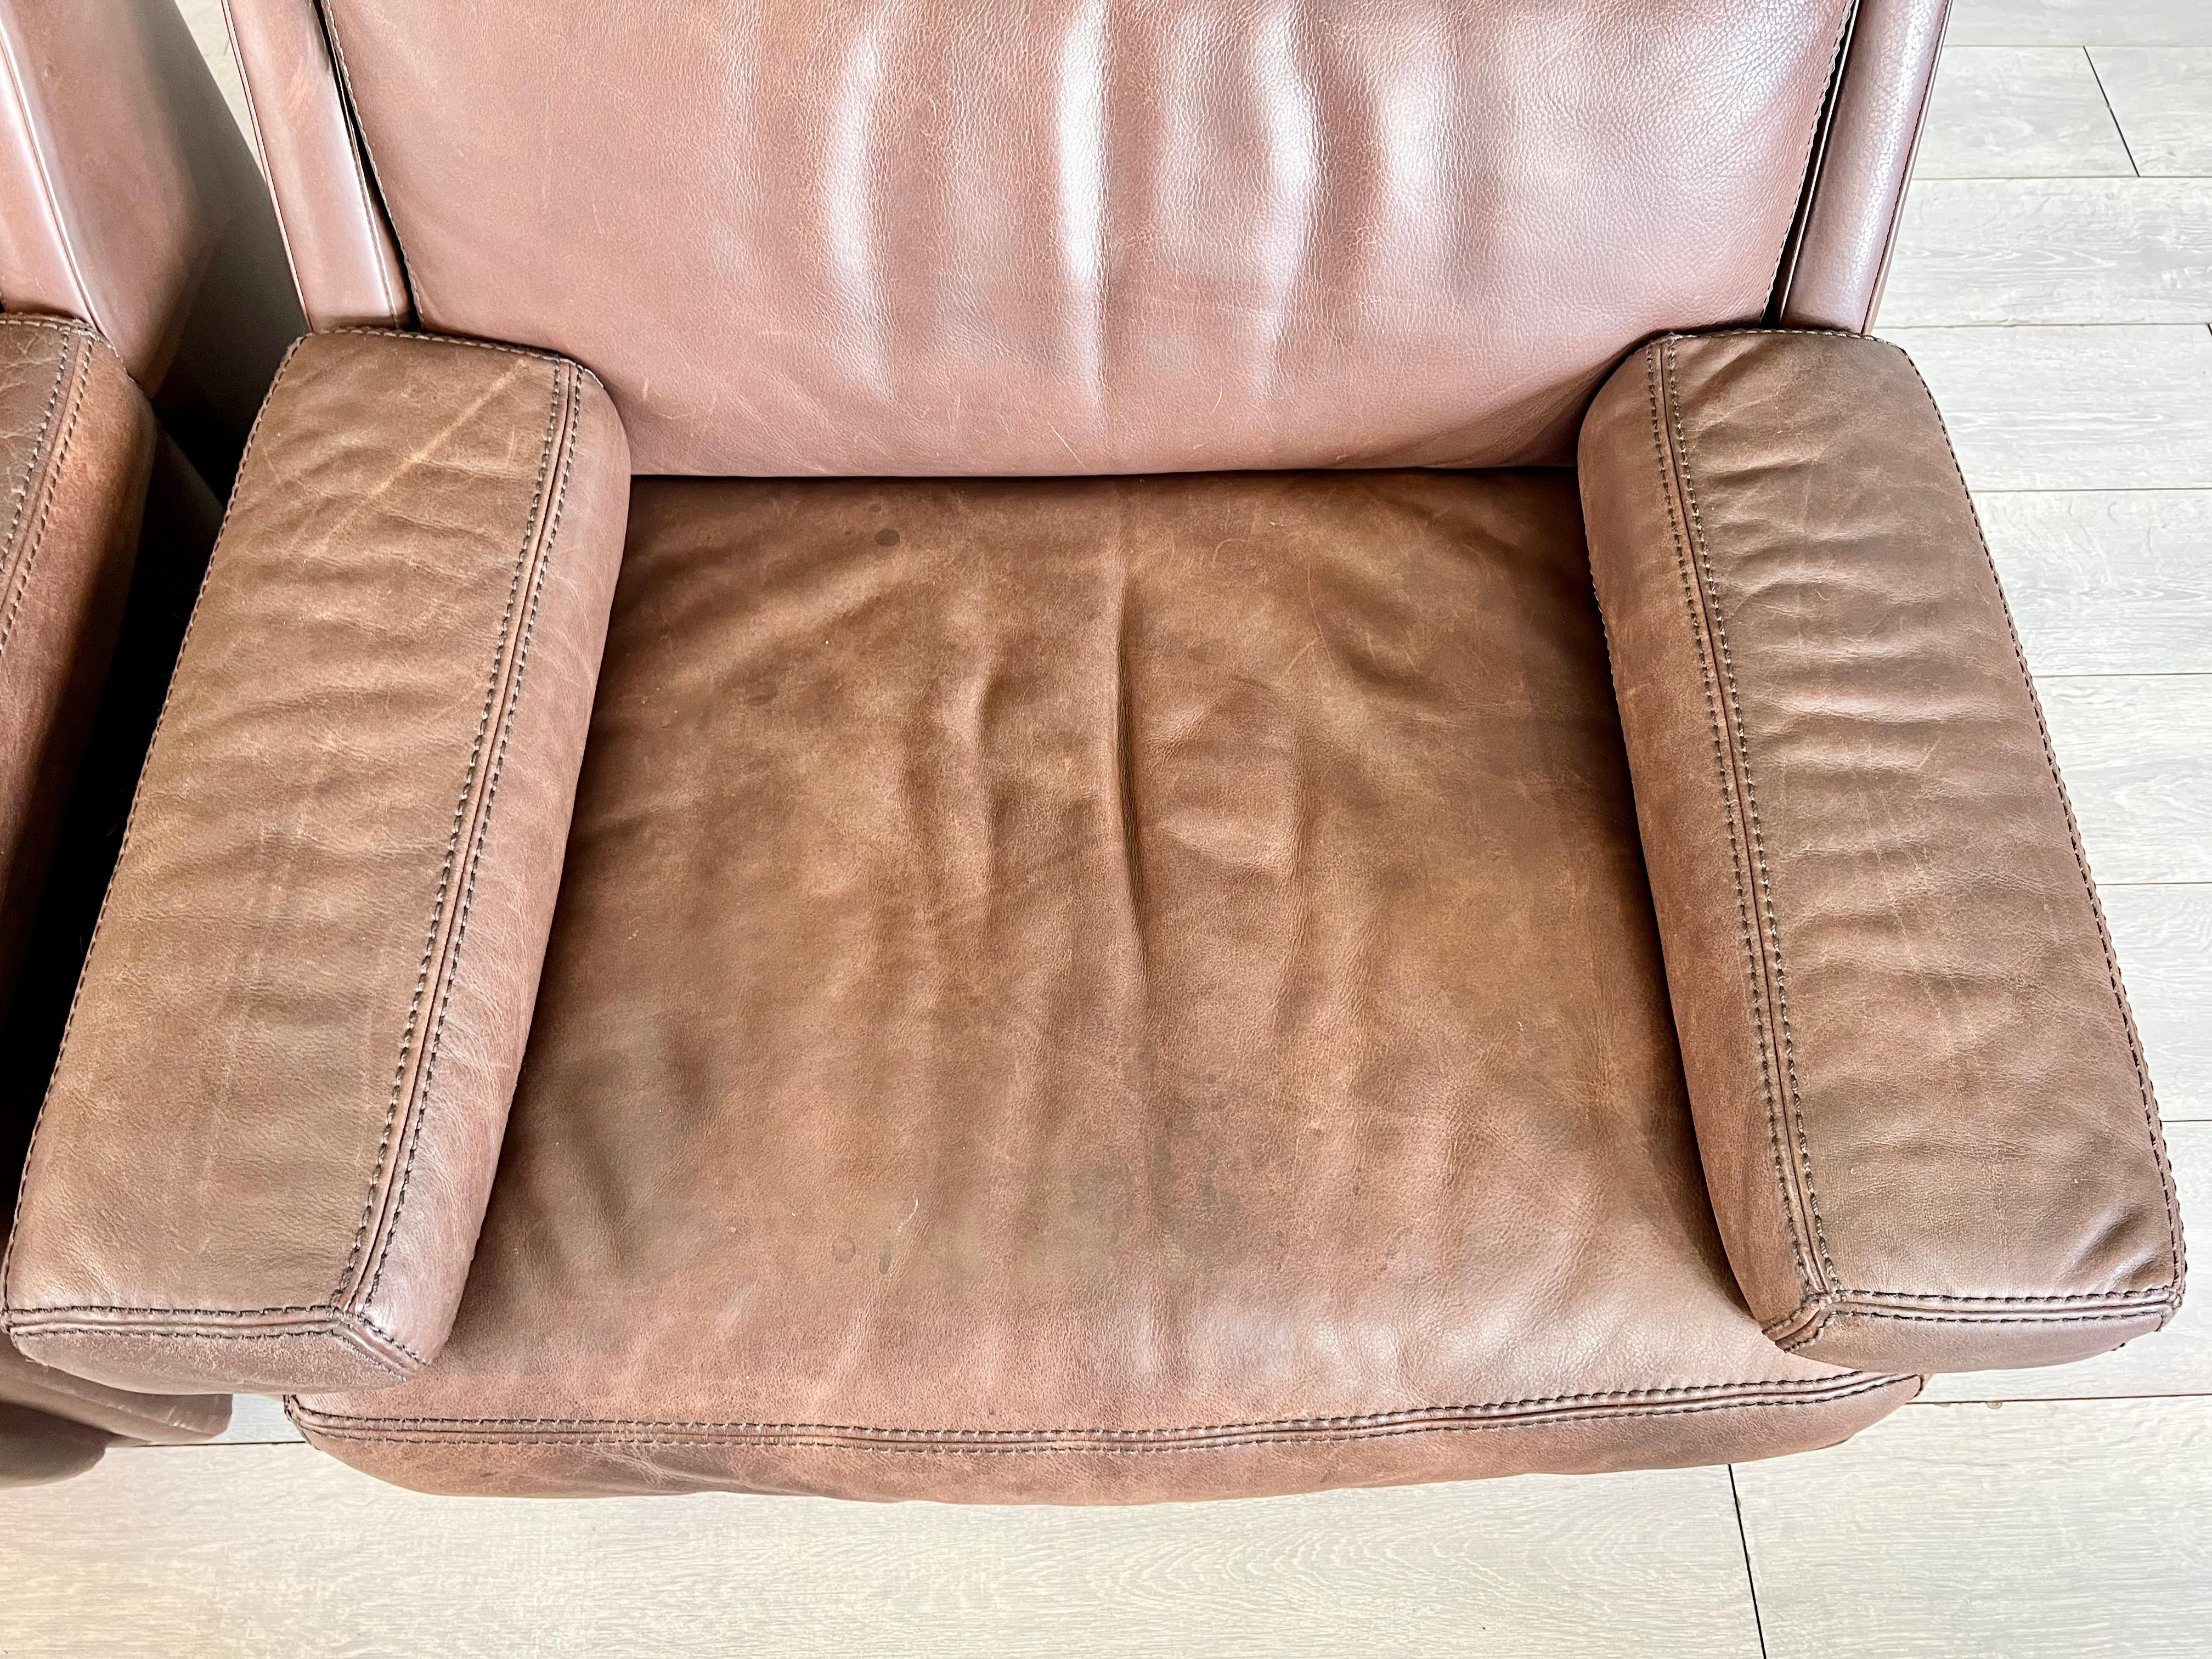 Mid-Century Modern Original Vintage Modern Leather Armchairs by Durlet, Belgium, 1970s - a Pair For Sale